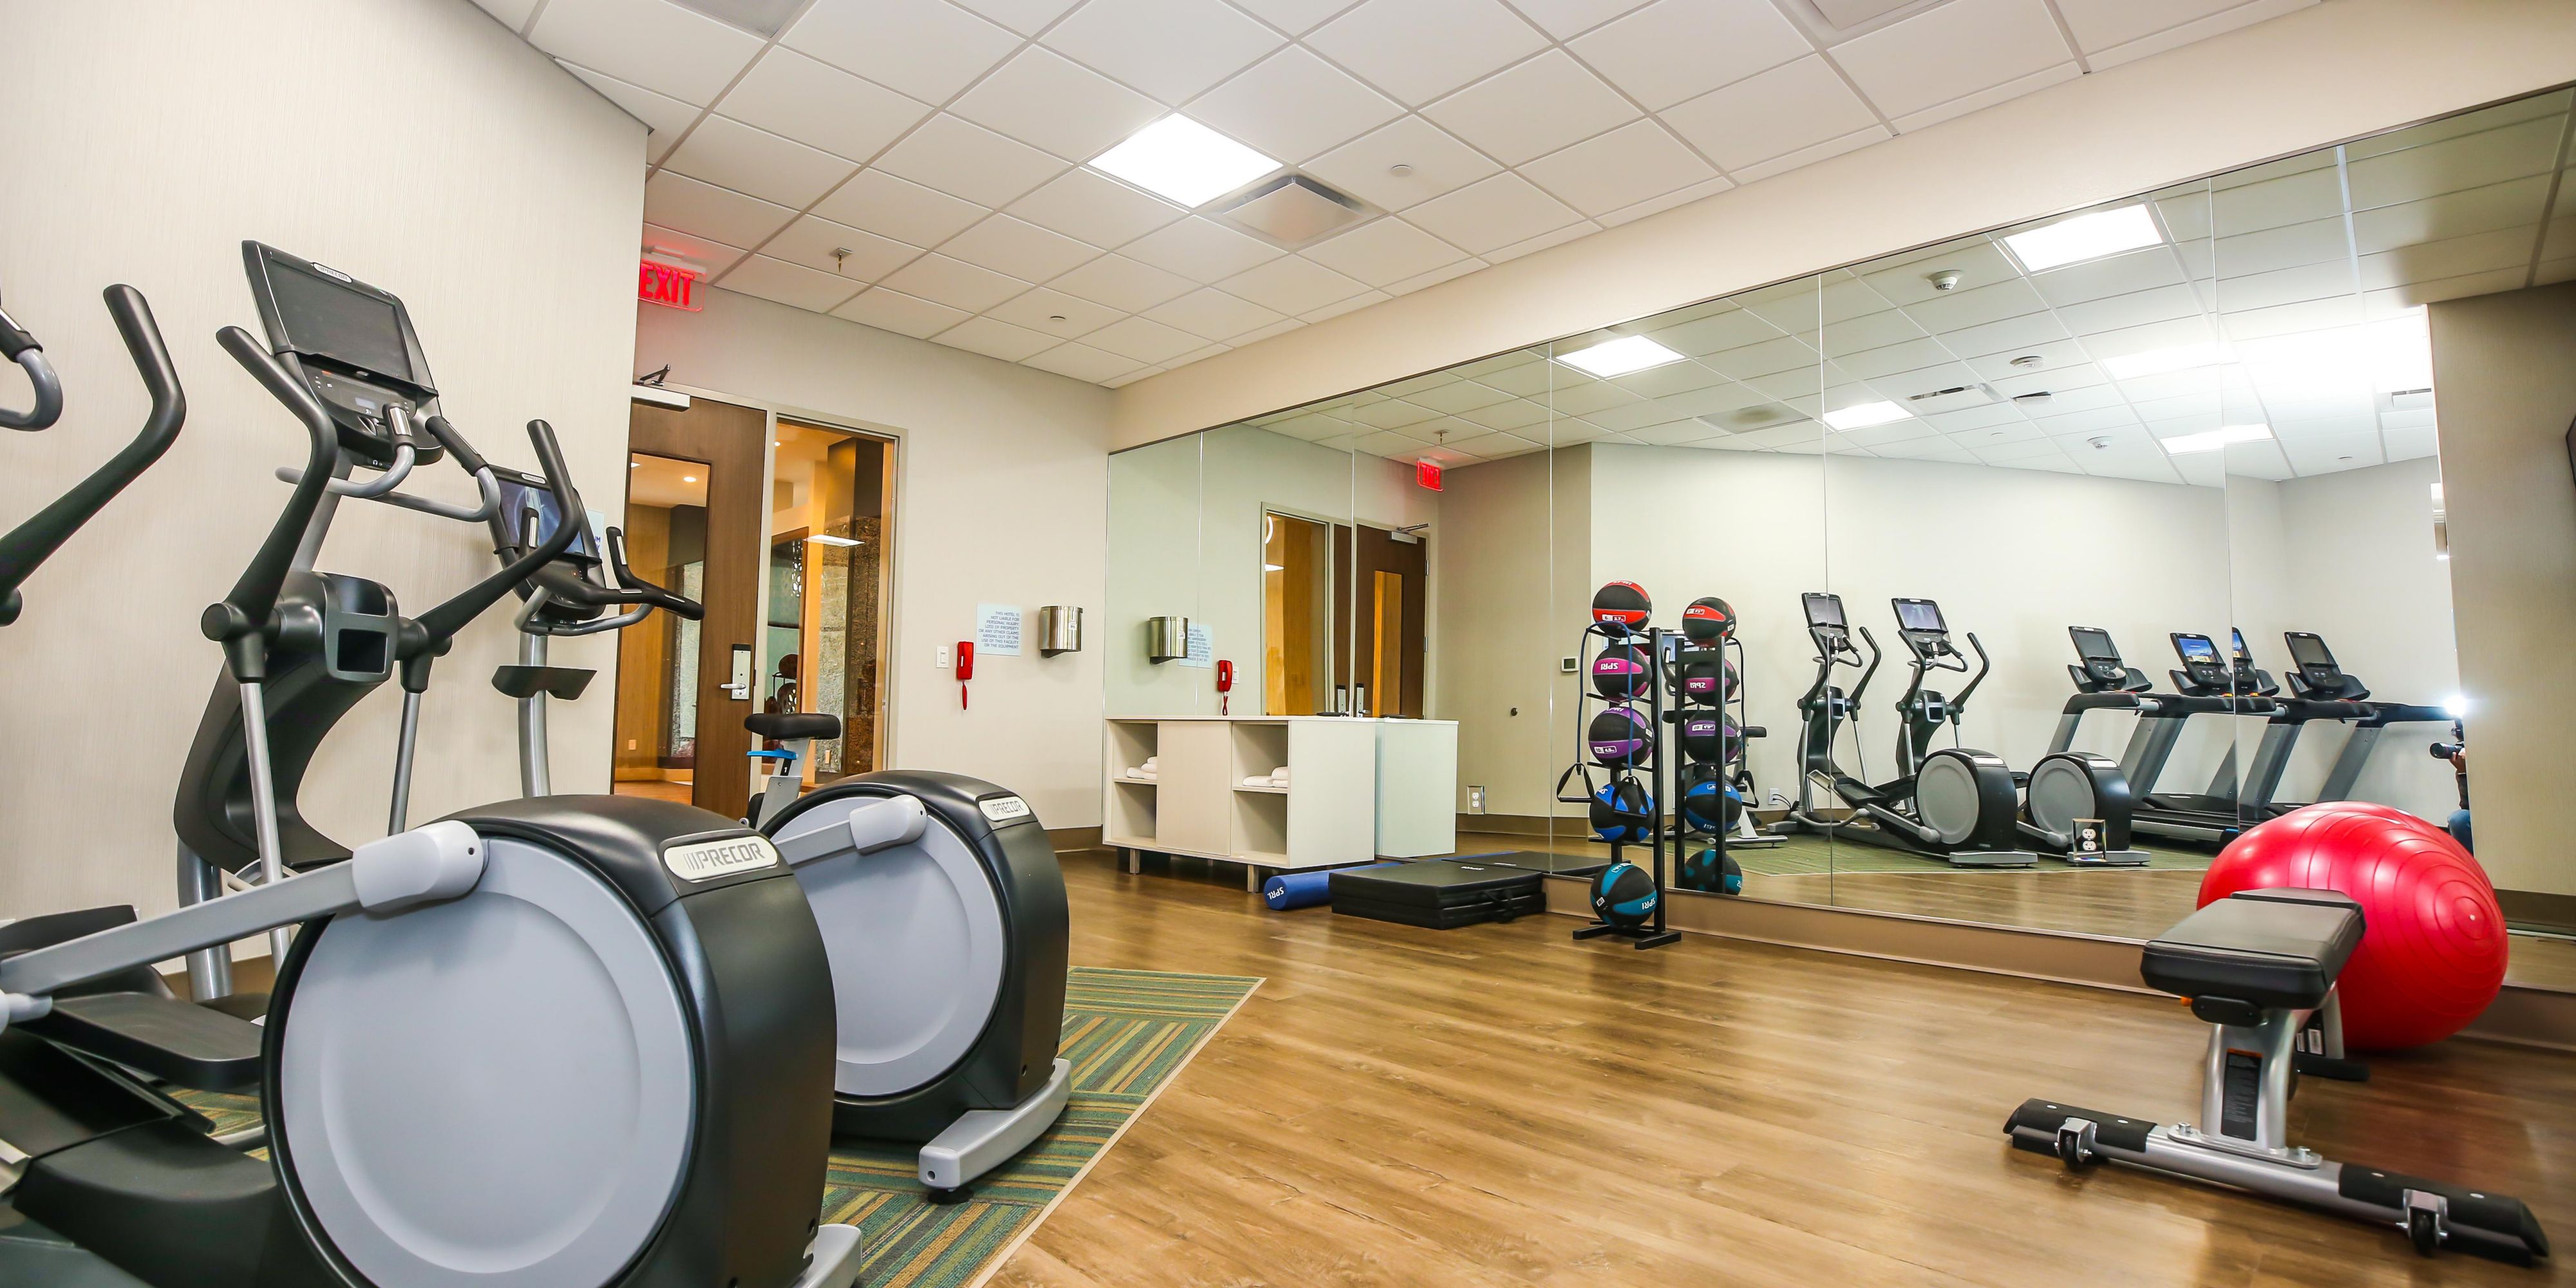 Start your day off feeling your best with our 24 hour complimentary fitness center. We have a great selection when it comes to choosing your preferred exercise equipment with a treadmill, elliptical, or stationary bicycle! We also have hand weights, yoga mats, and medicine balls that are available in our large open workout area.